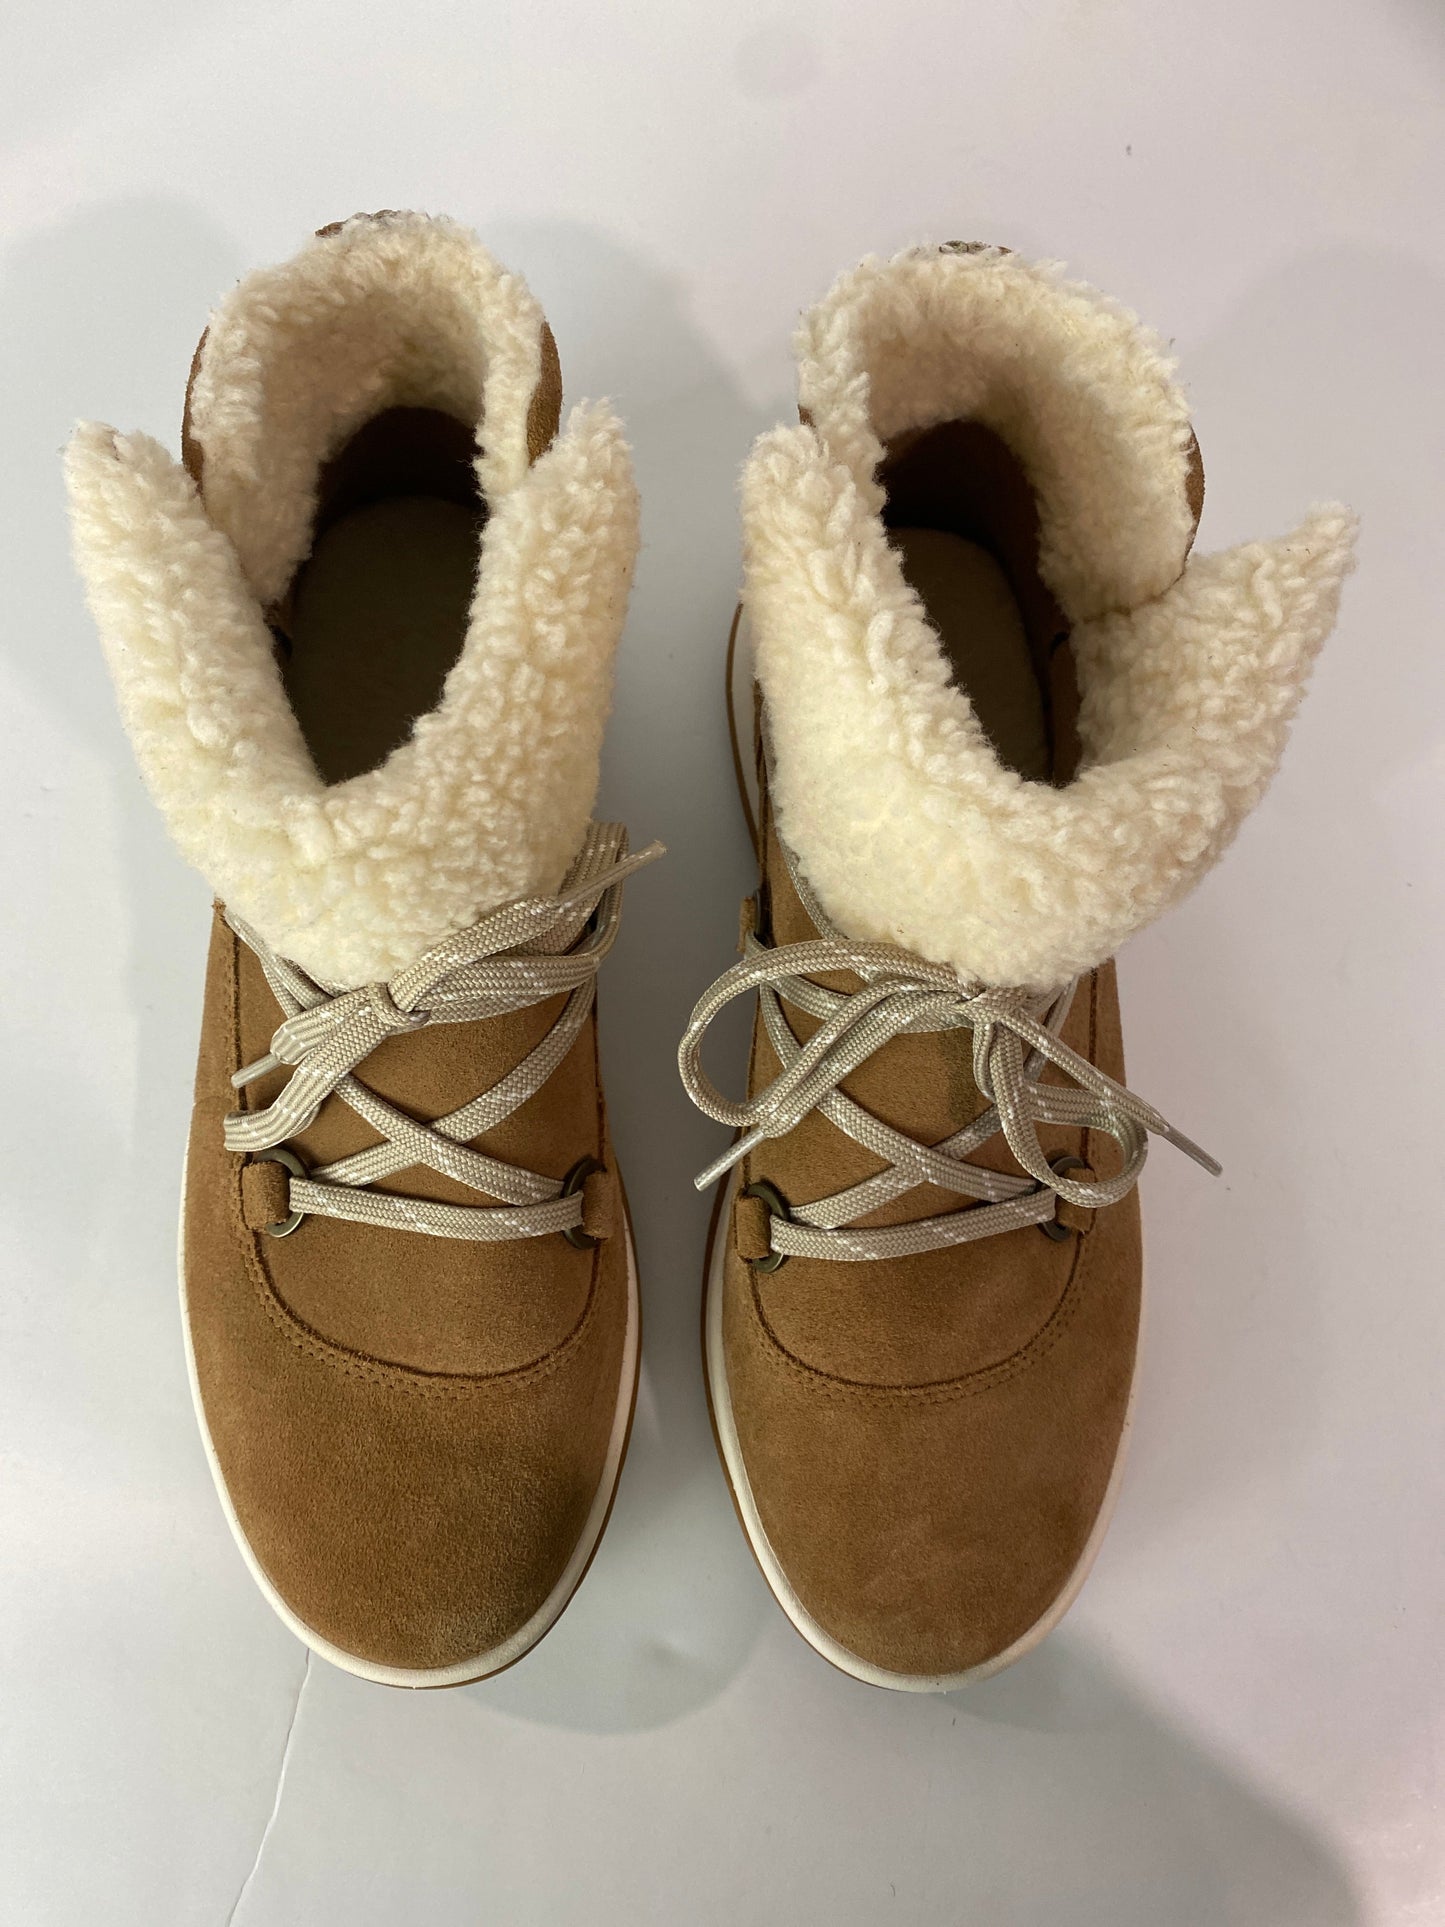 Brown Boots Ankle Flats Ugg, Size 9